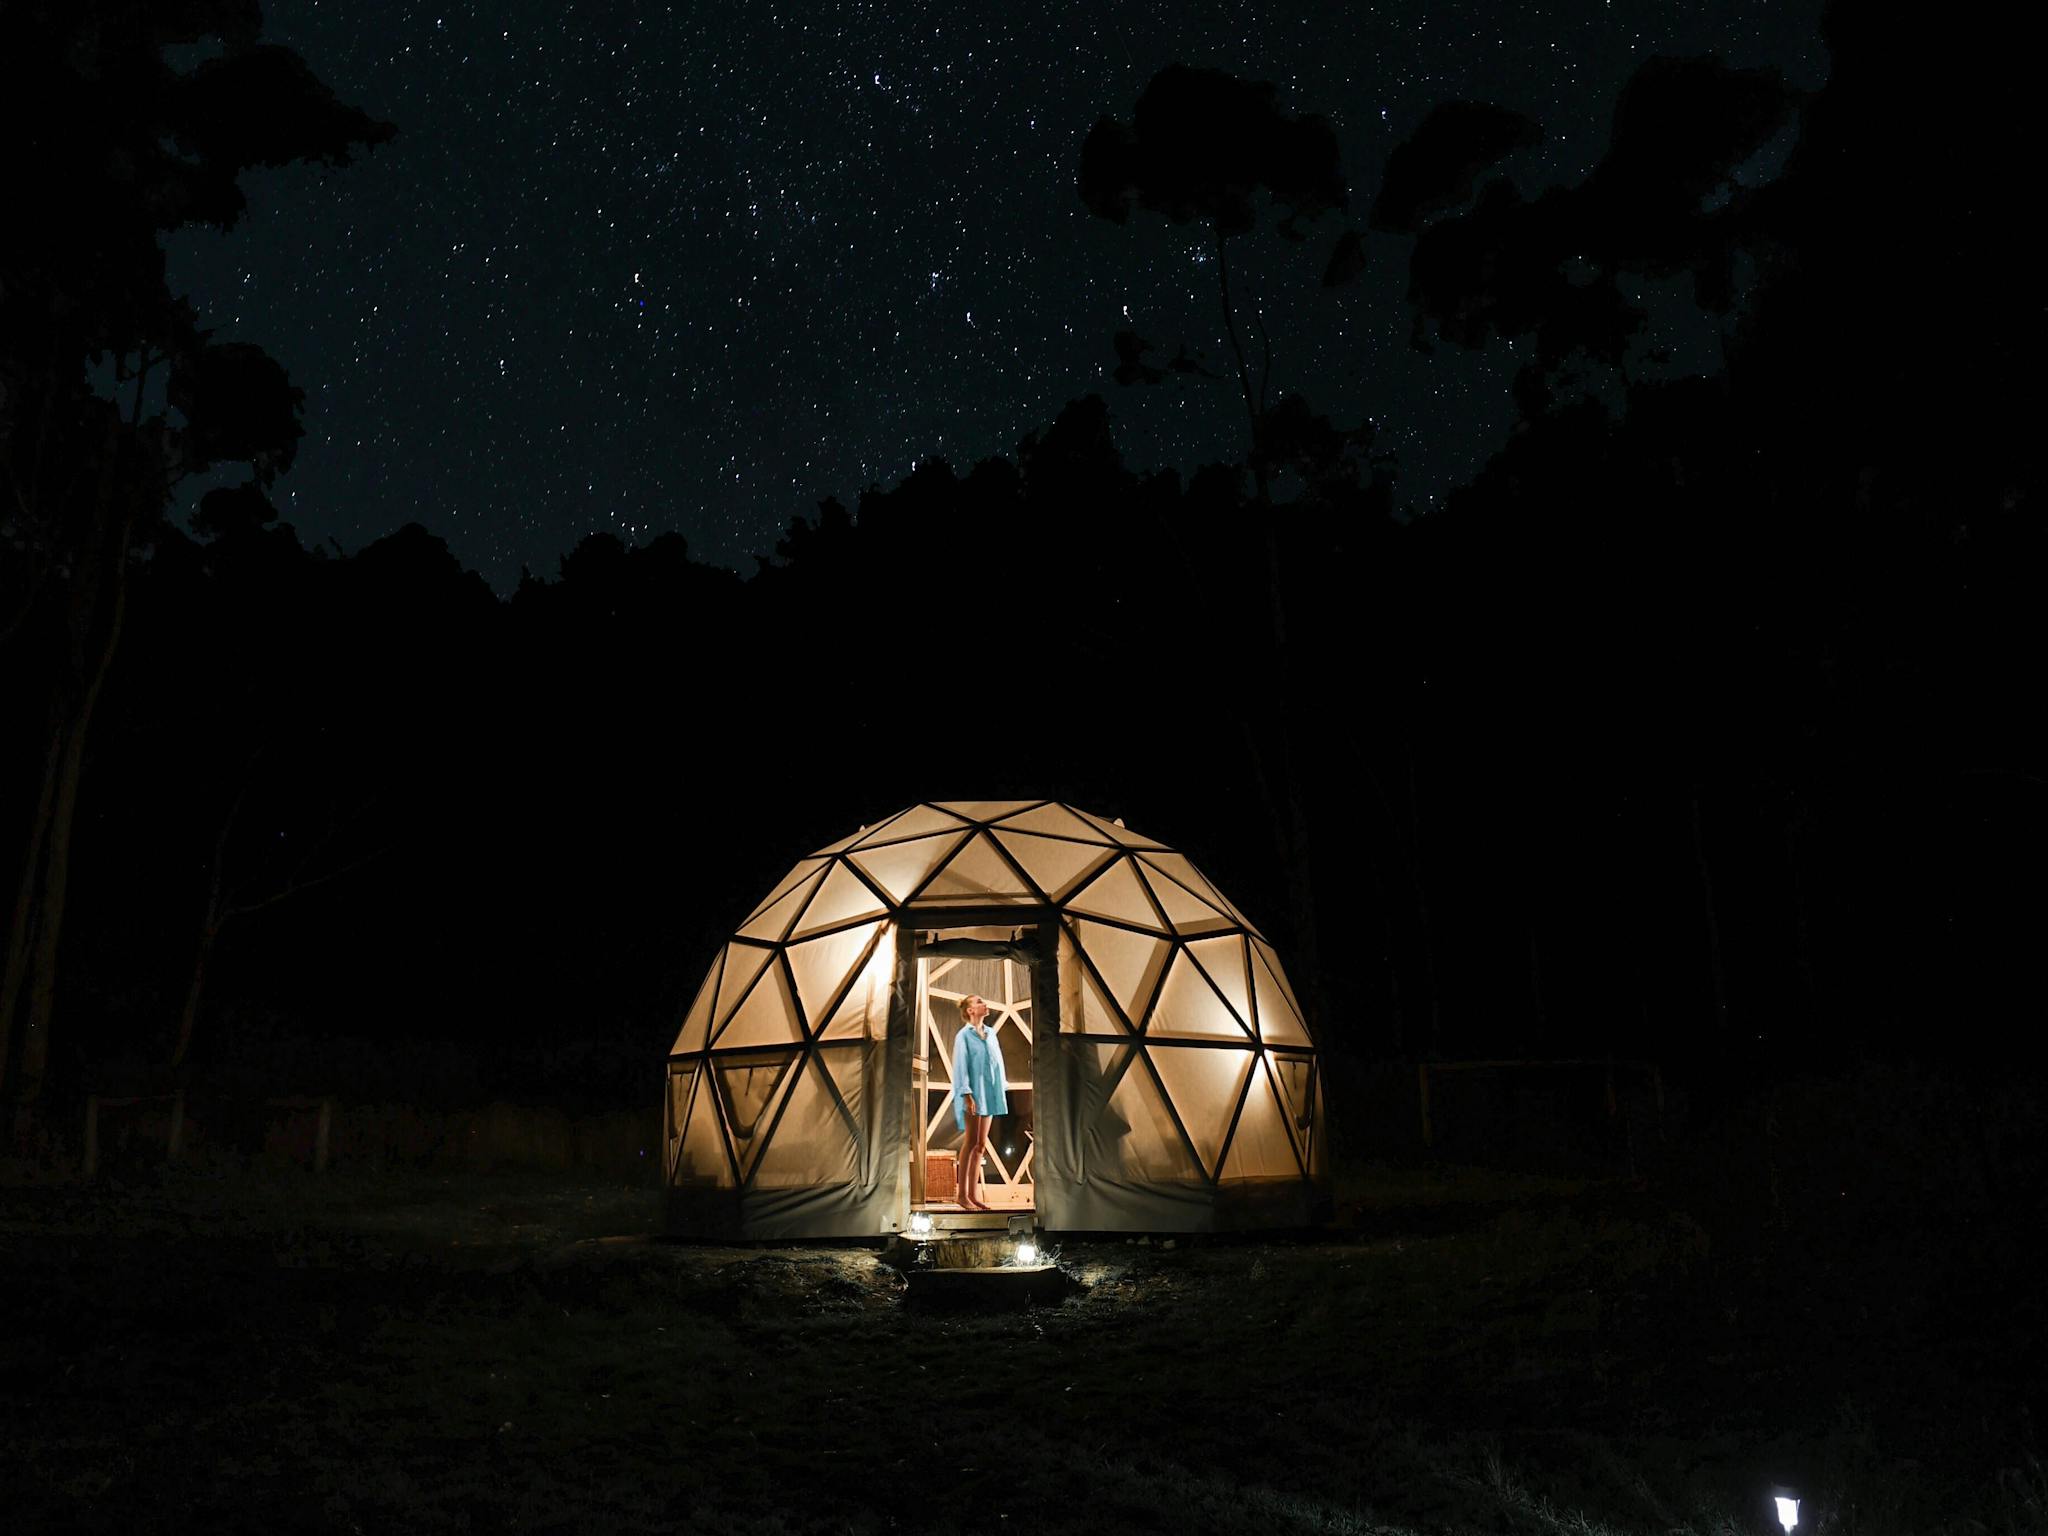 A geodesic dome aglow in the dark night amid a background of a starry sky.